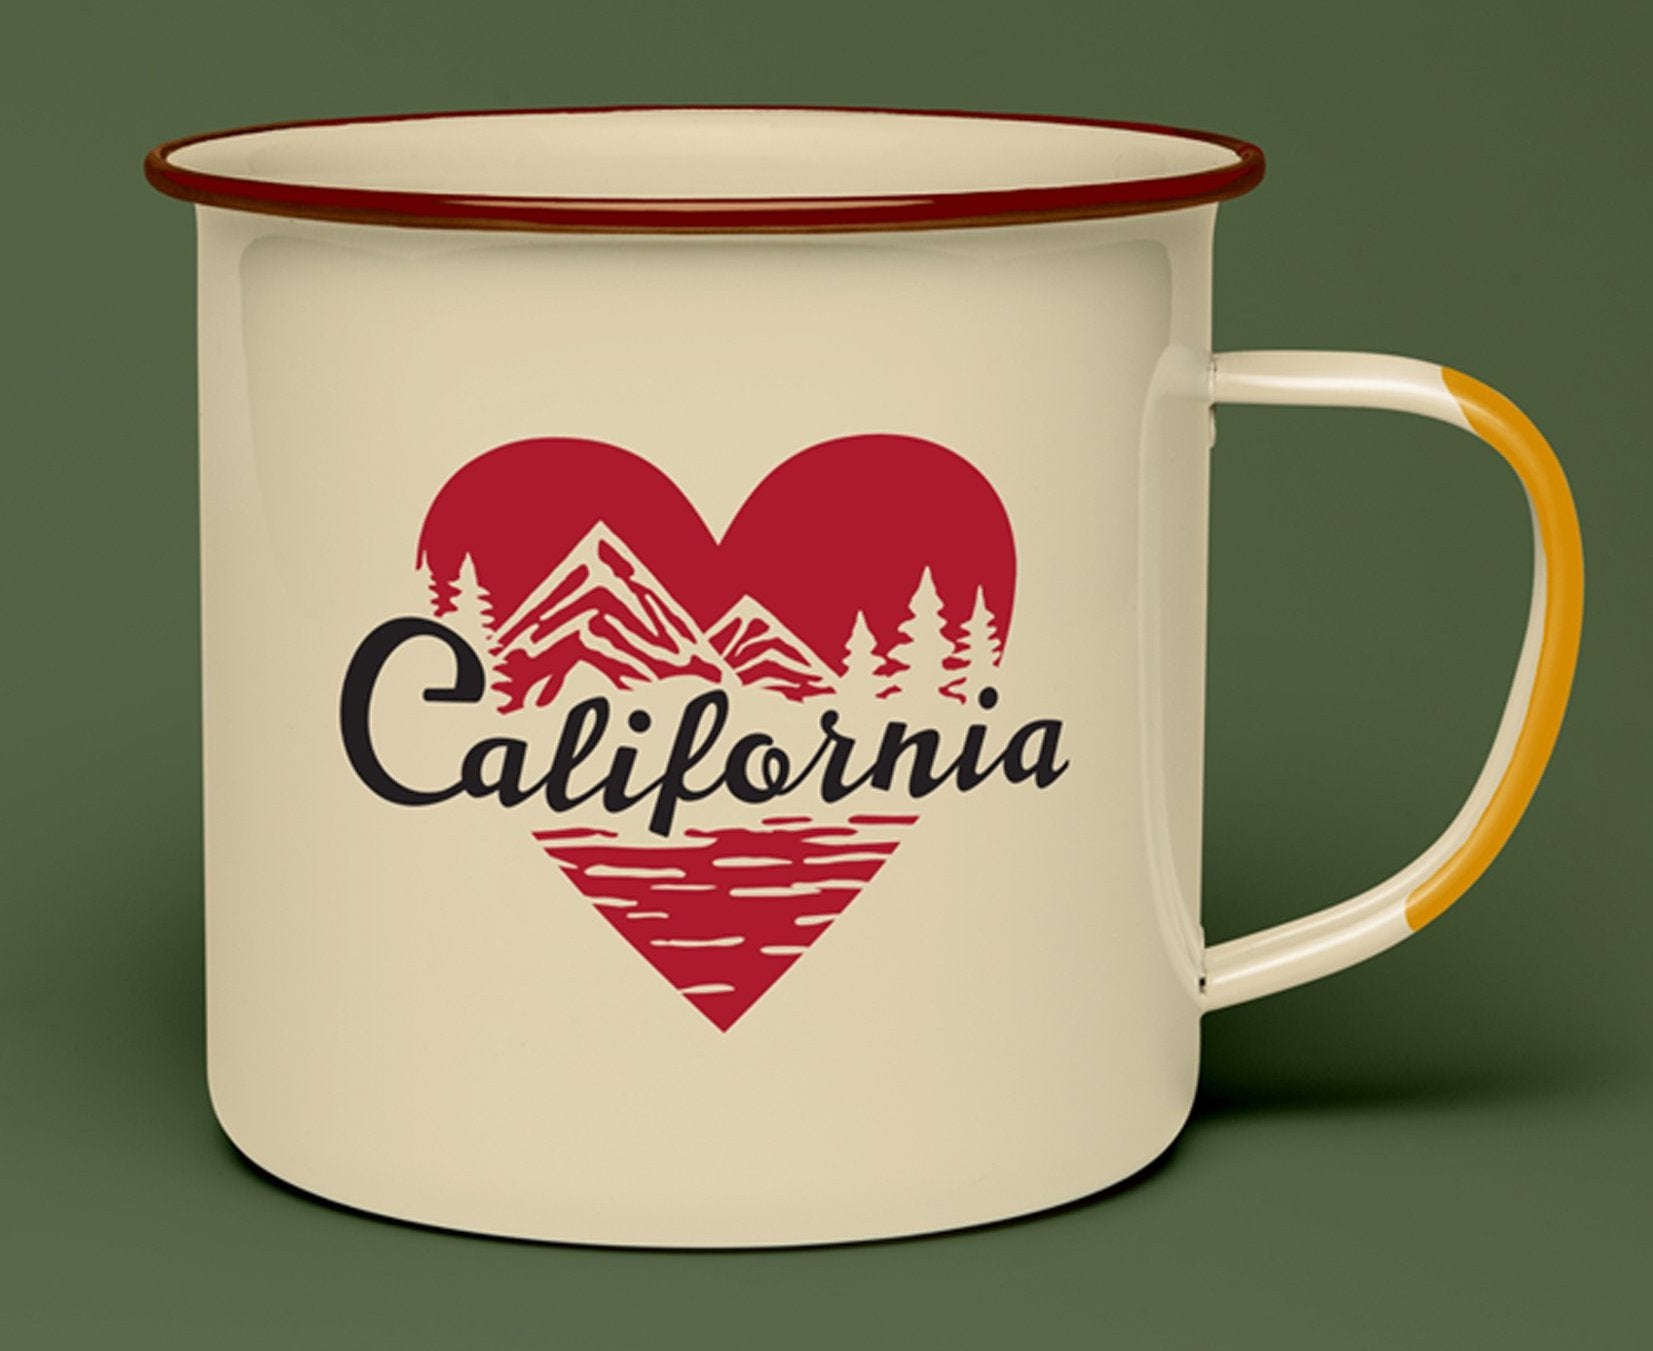 United by Blue's California mug is a tan, steel mug with red heart